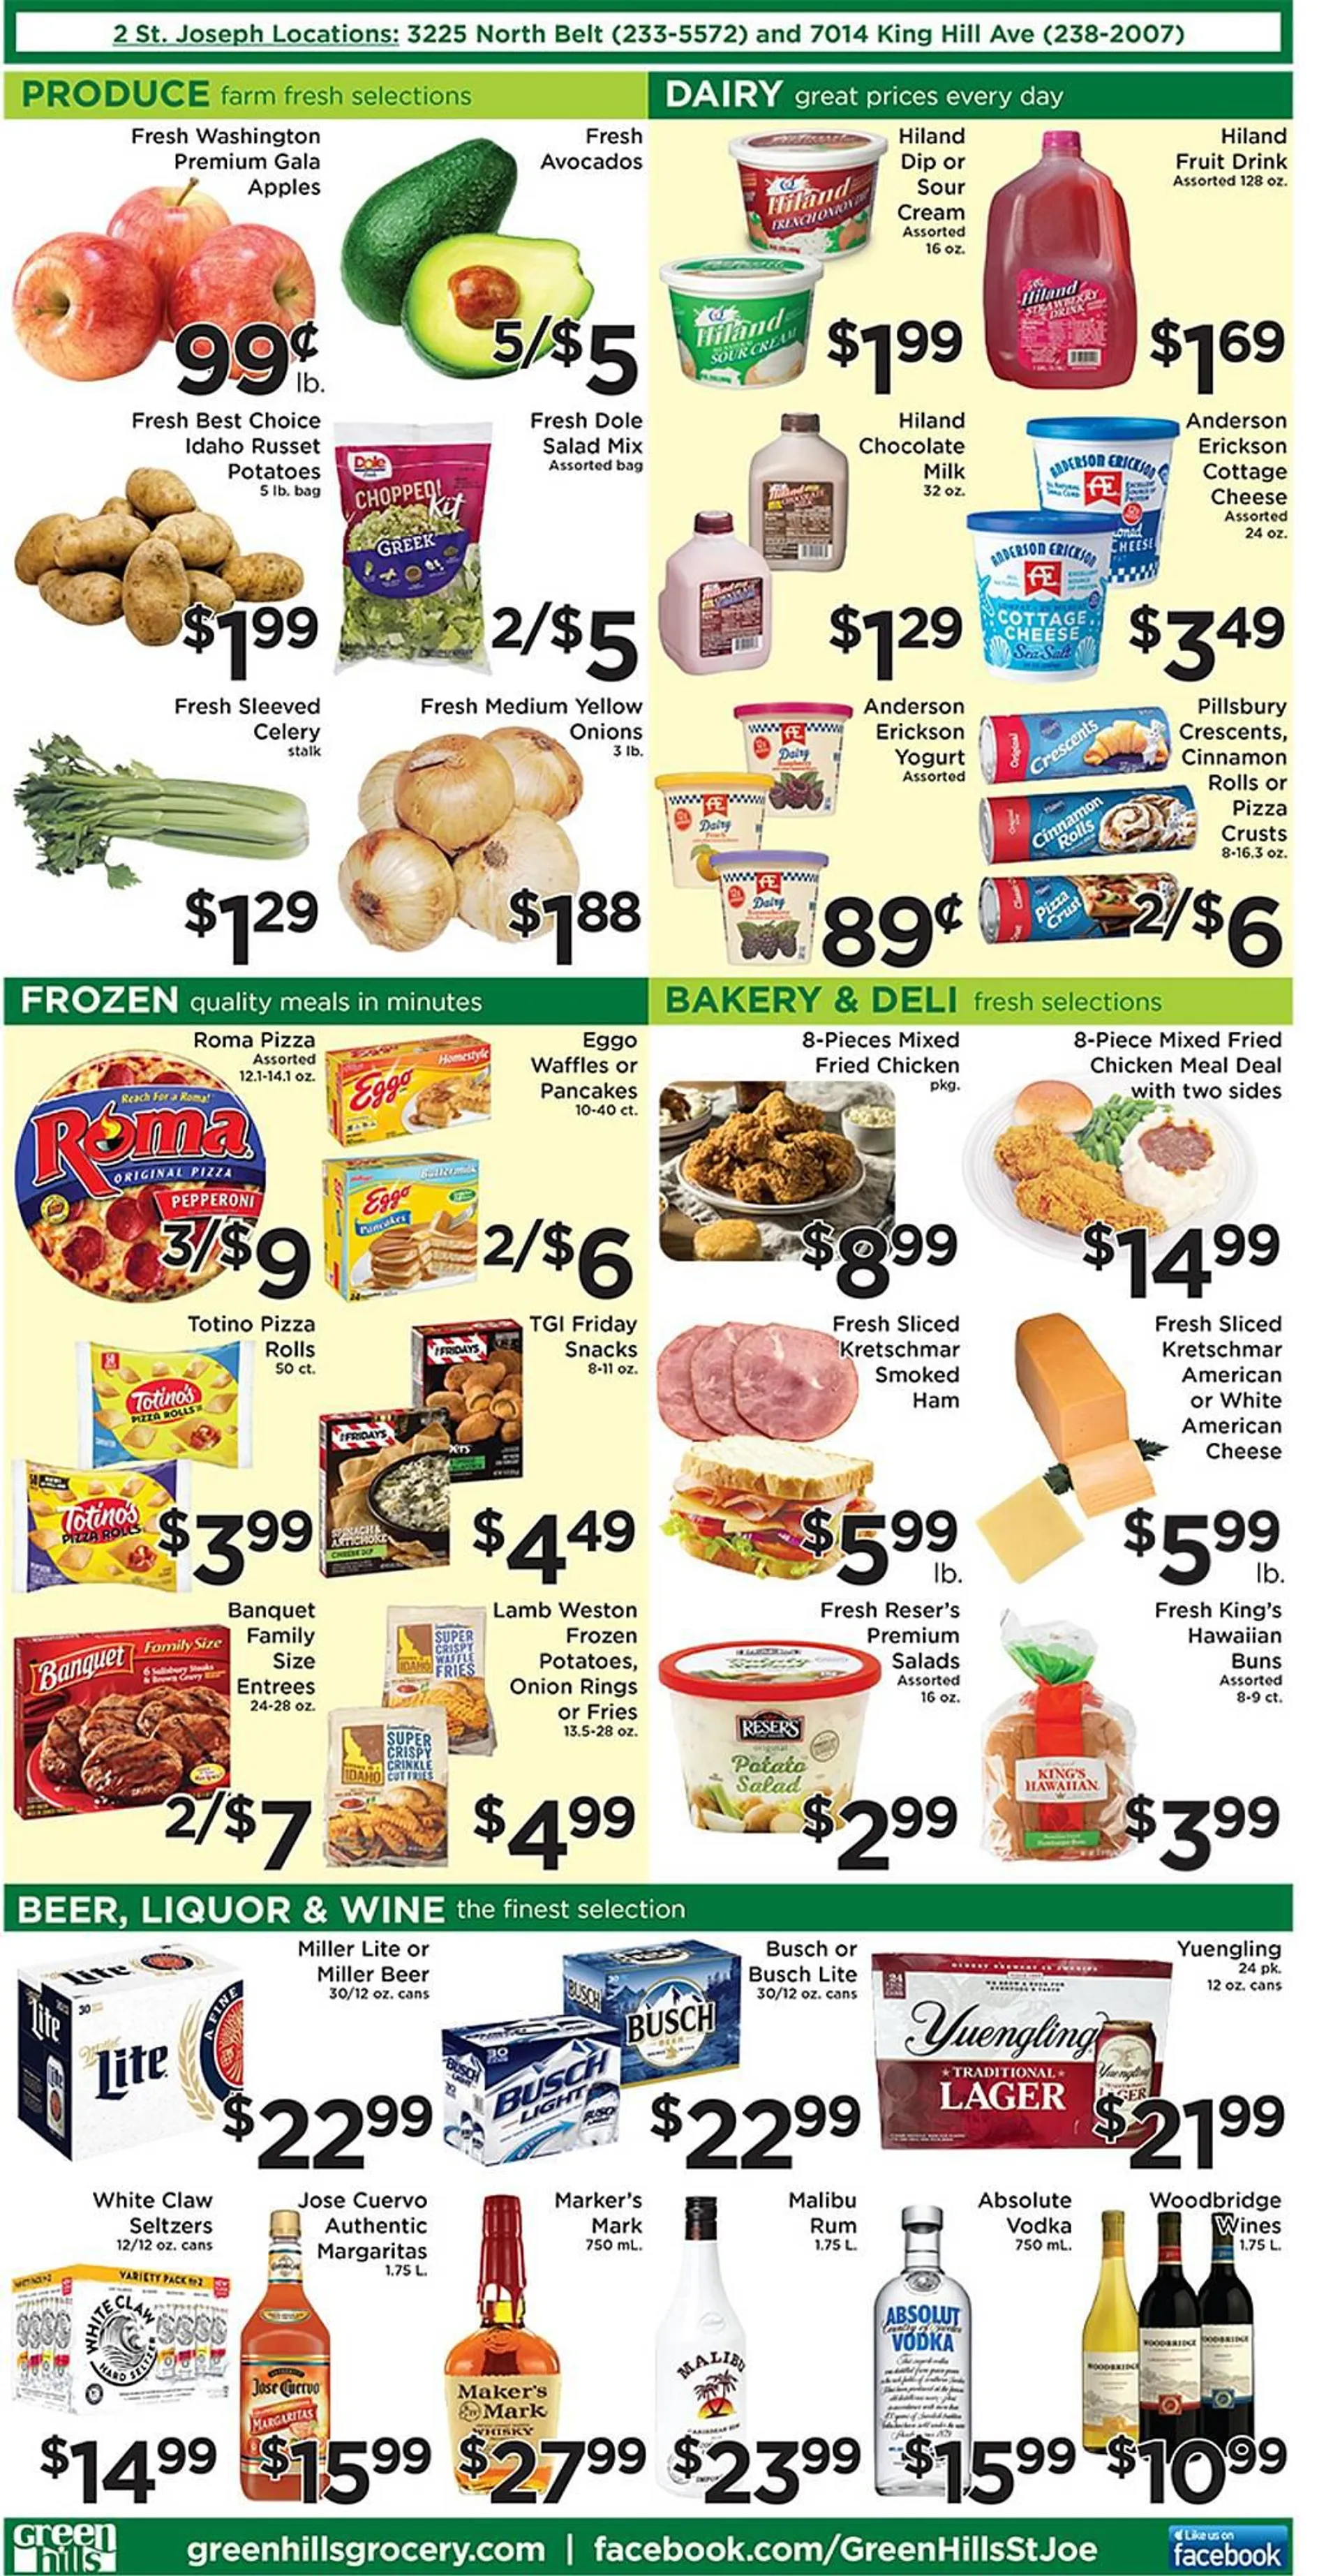 Green Hills Grocery ad - 2